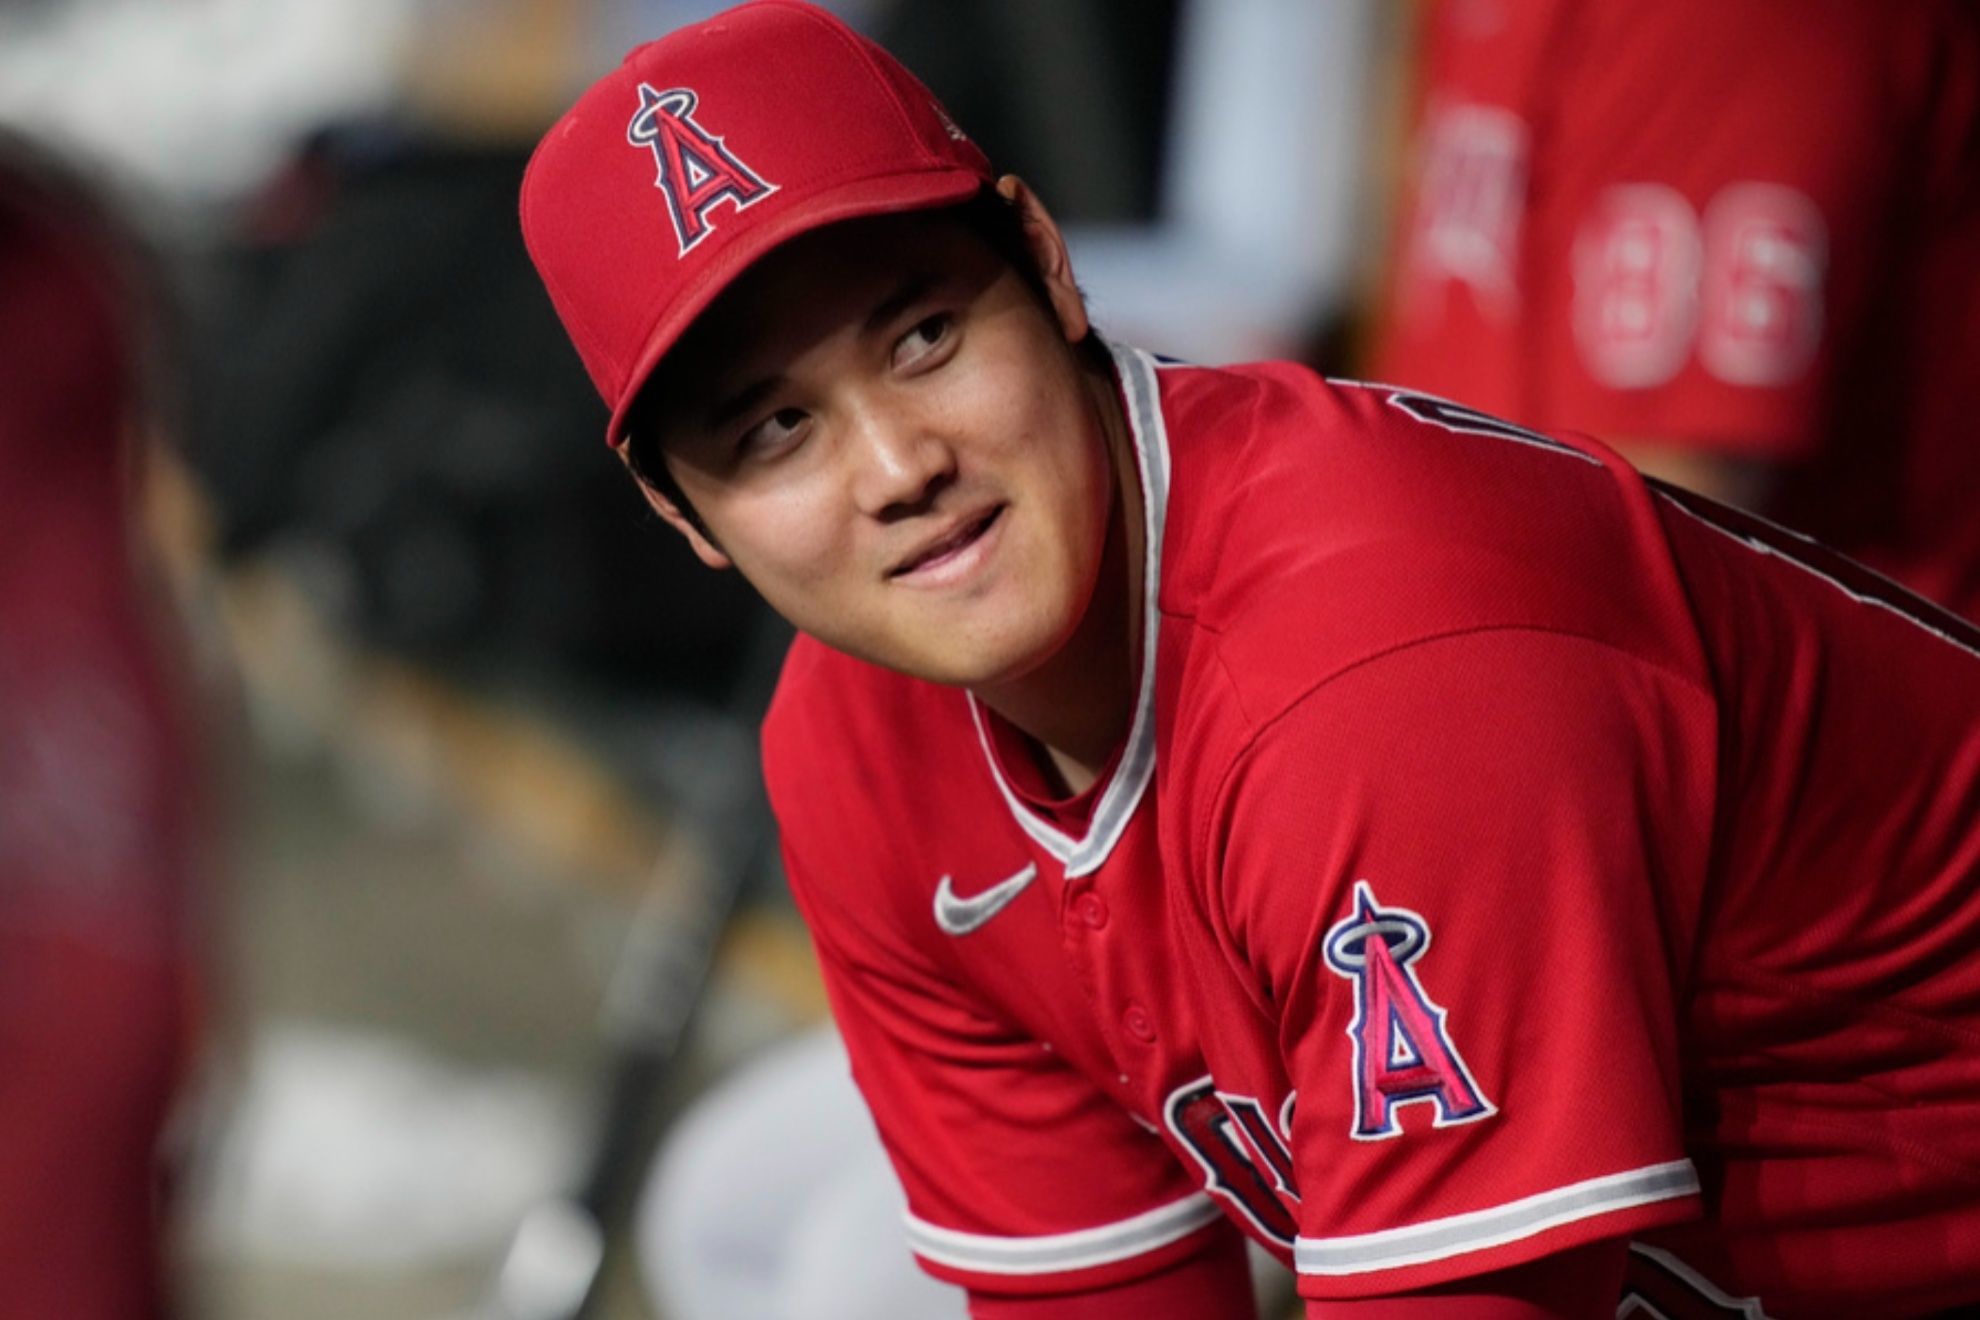 UCL tear recovery time: When will Shohei Ohtani return for Los Angeles Angels?